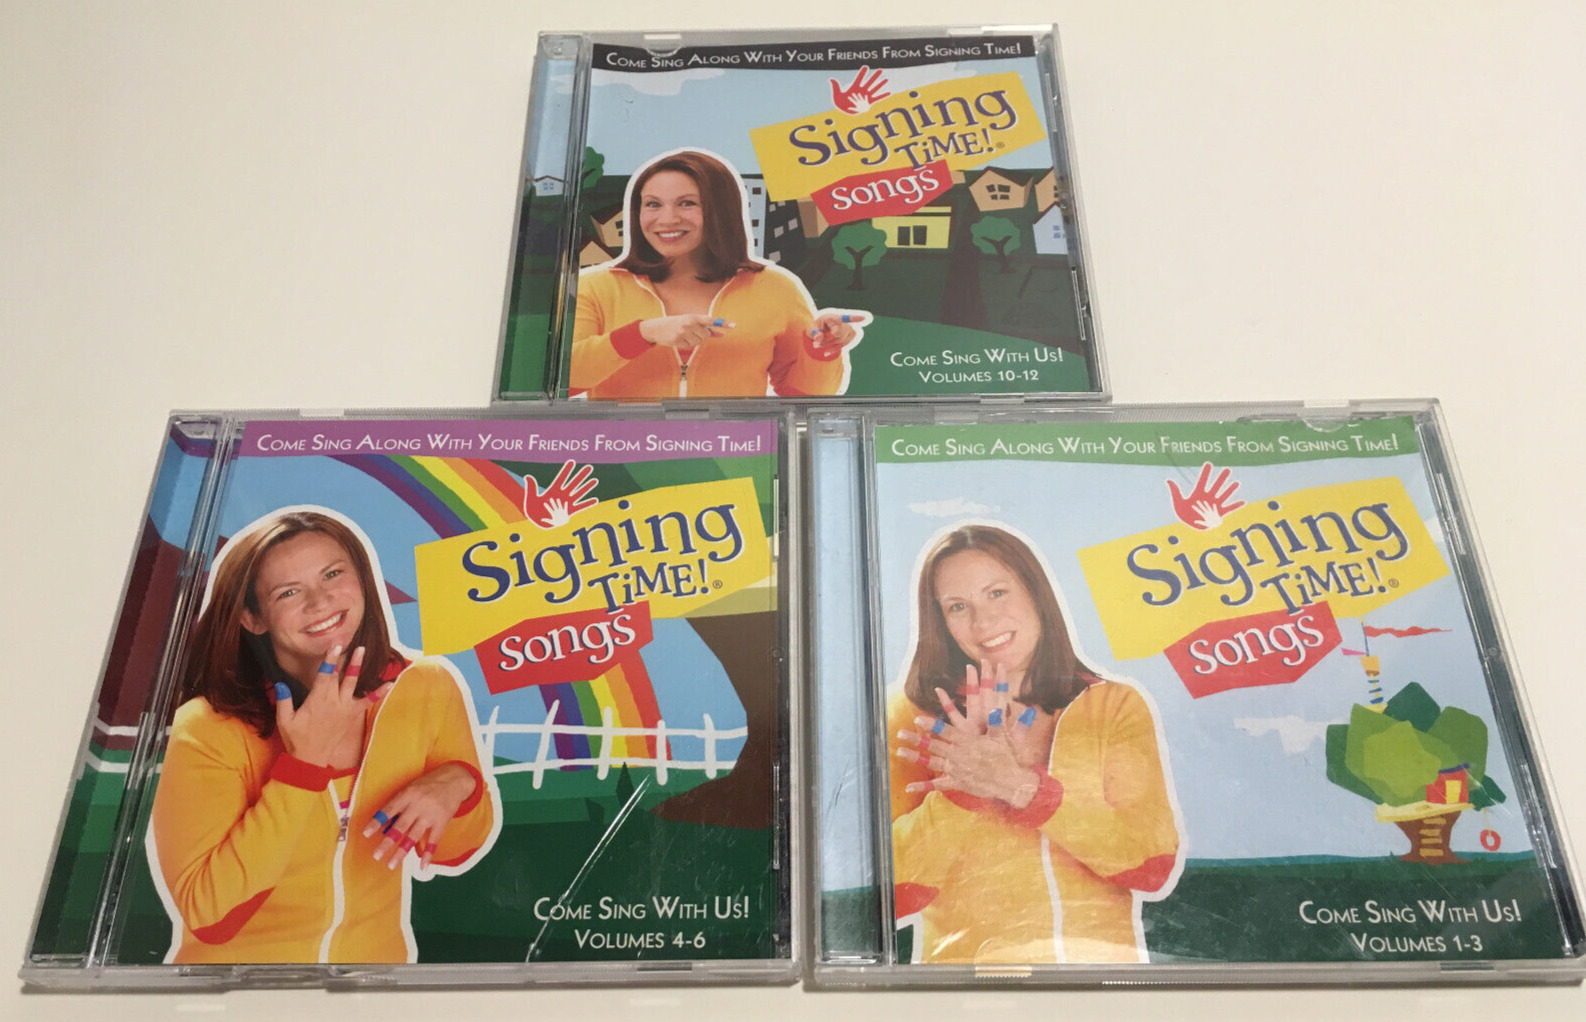 Signing Time 3-CD Disc Lot Set Vol 1-3, 4-6 & 10-12 Come Sing With Us